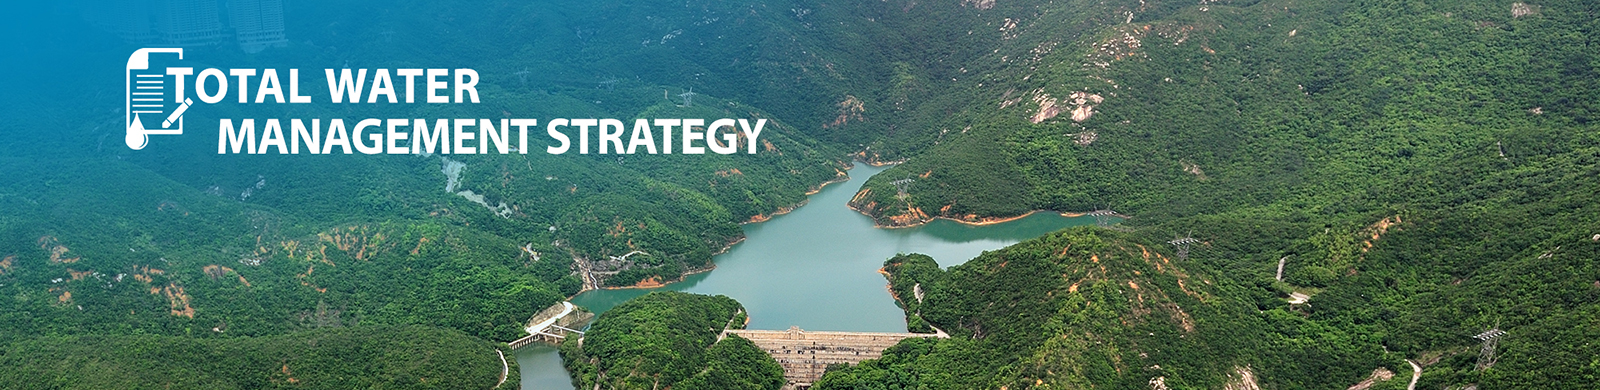 Total Water Management Strategy